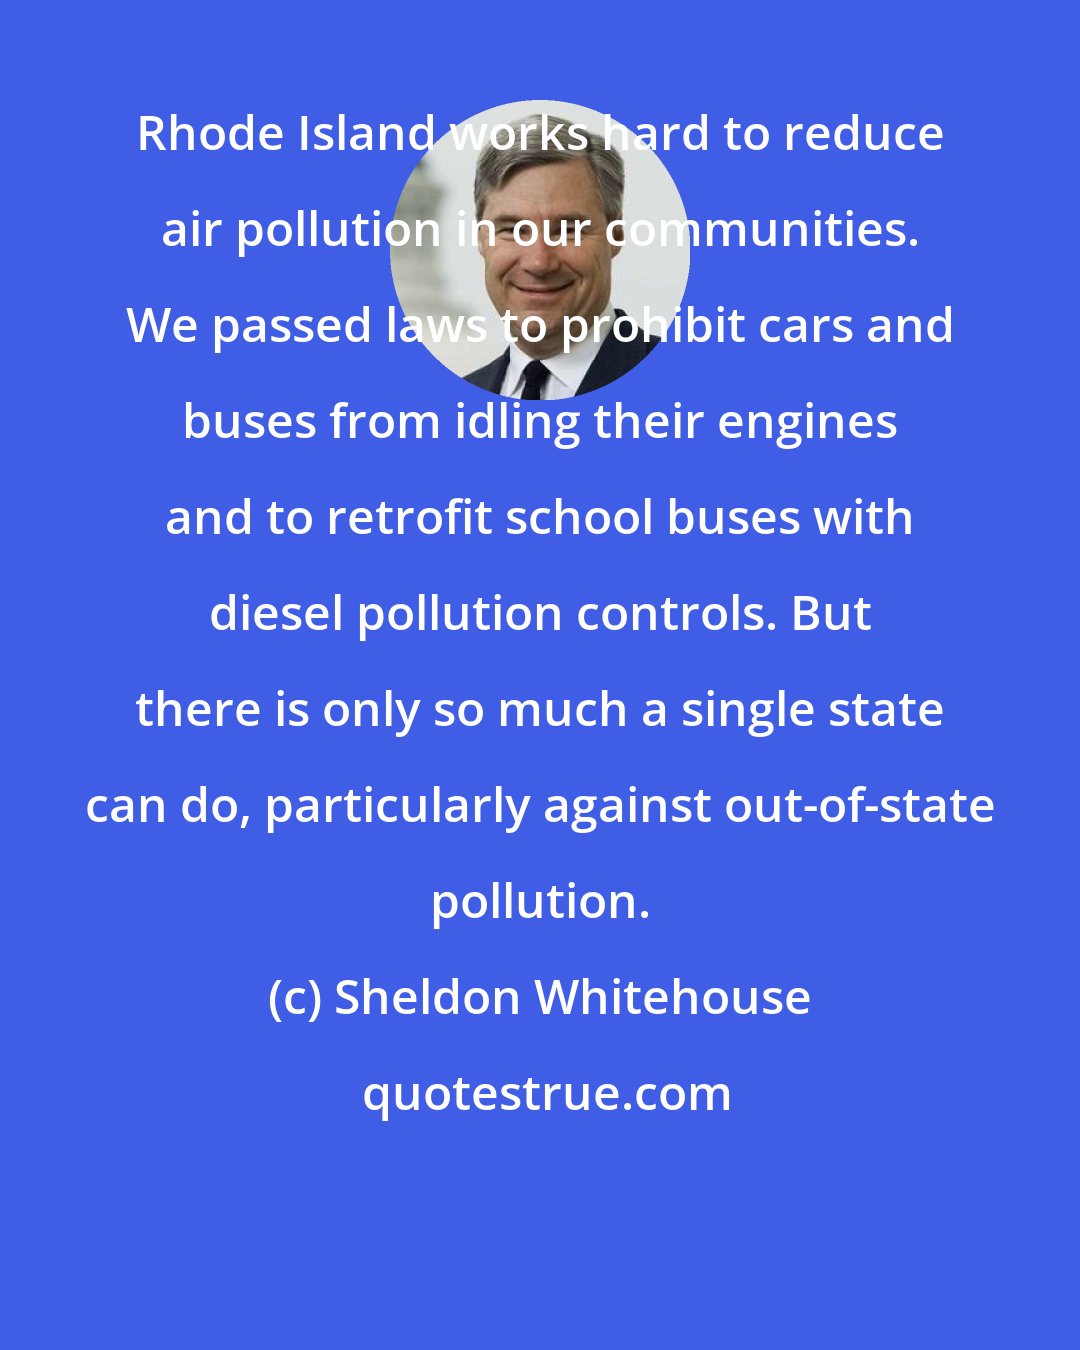 Sheldon Whitehouse: Rhode Island works hard to reduce air pollution in our communities. We passed laws to prohibit cars and buses from idling their engines and to retrofit school buses with diesel pollution controls. But there is only so much a single state can do, particularly against out-of-state pollution.